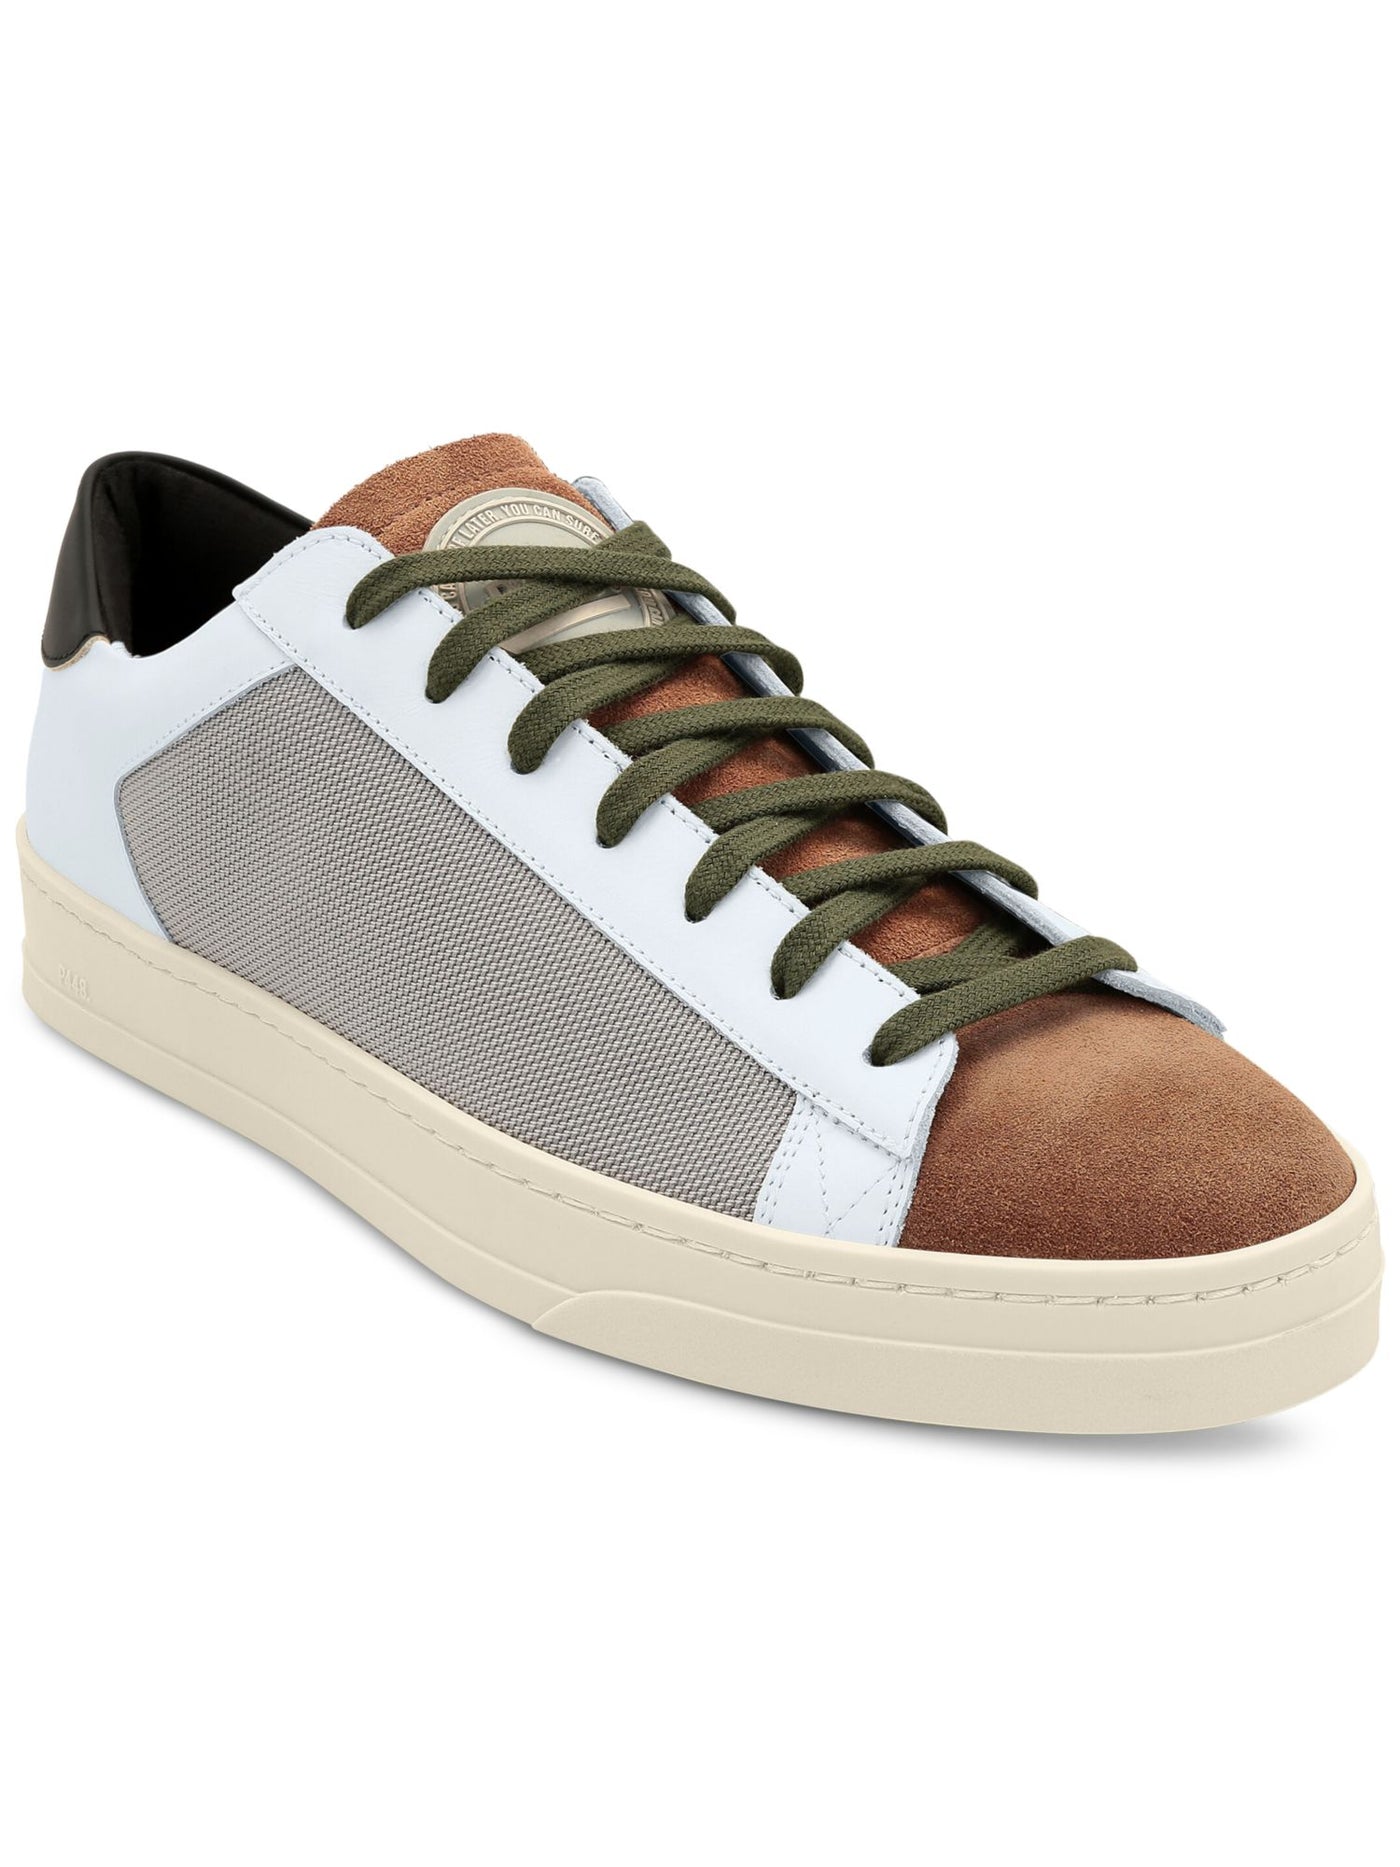 P448 Mens White Color Block Jack Peaky Round Toe Platform Lace-Up Leather Sneakers Shoes 41